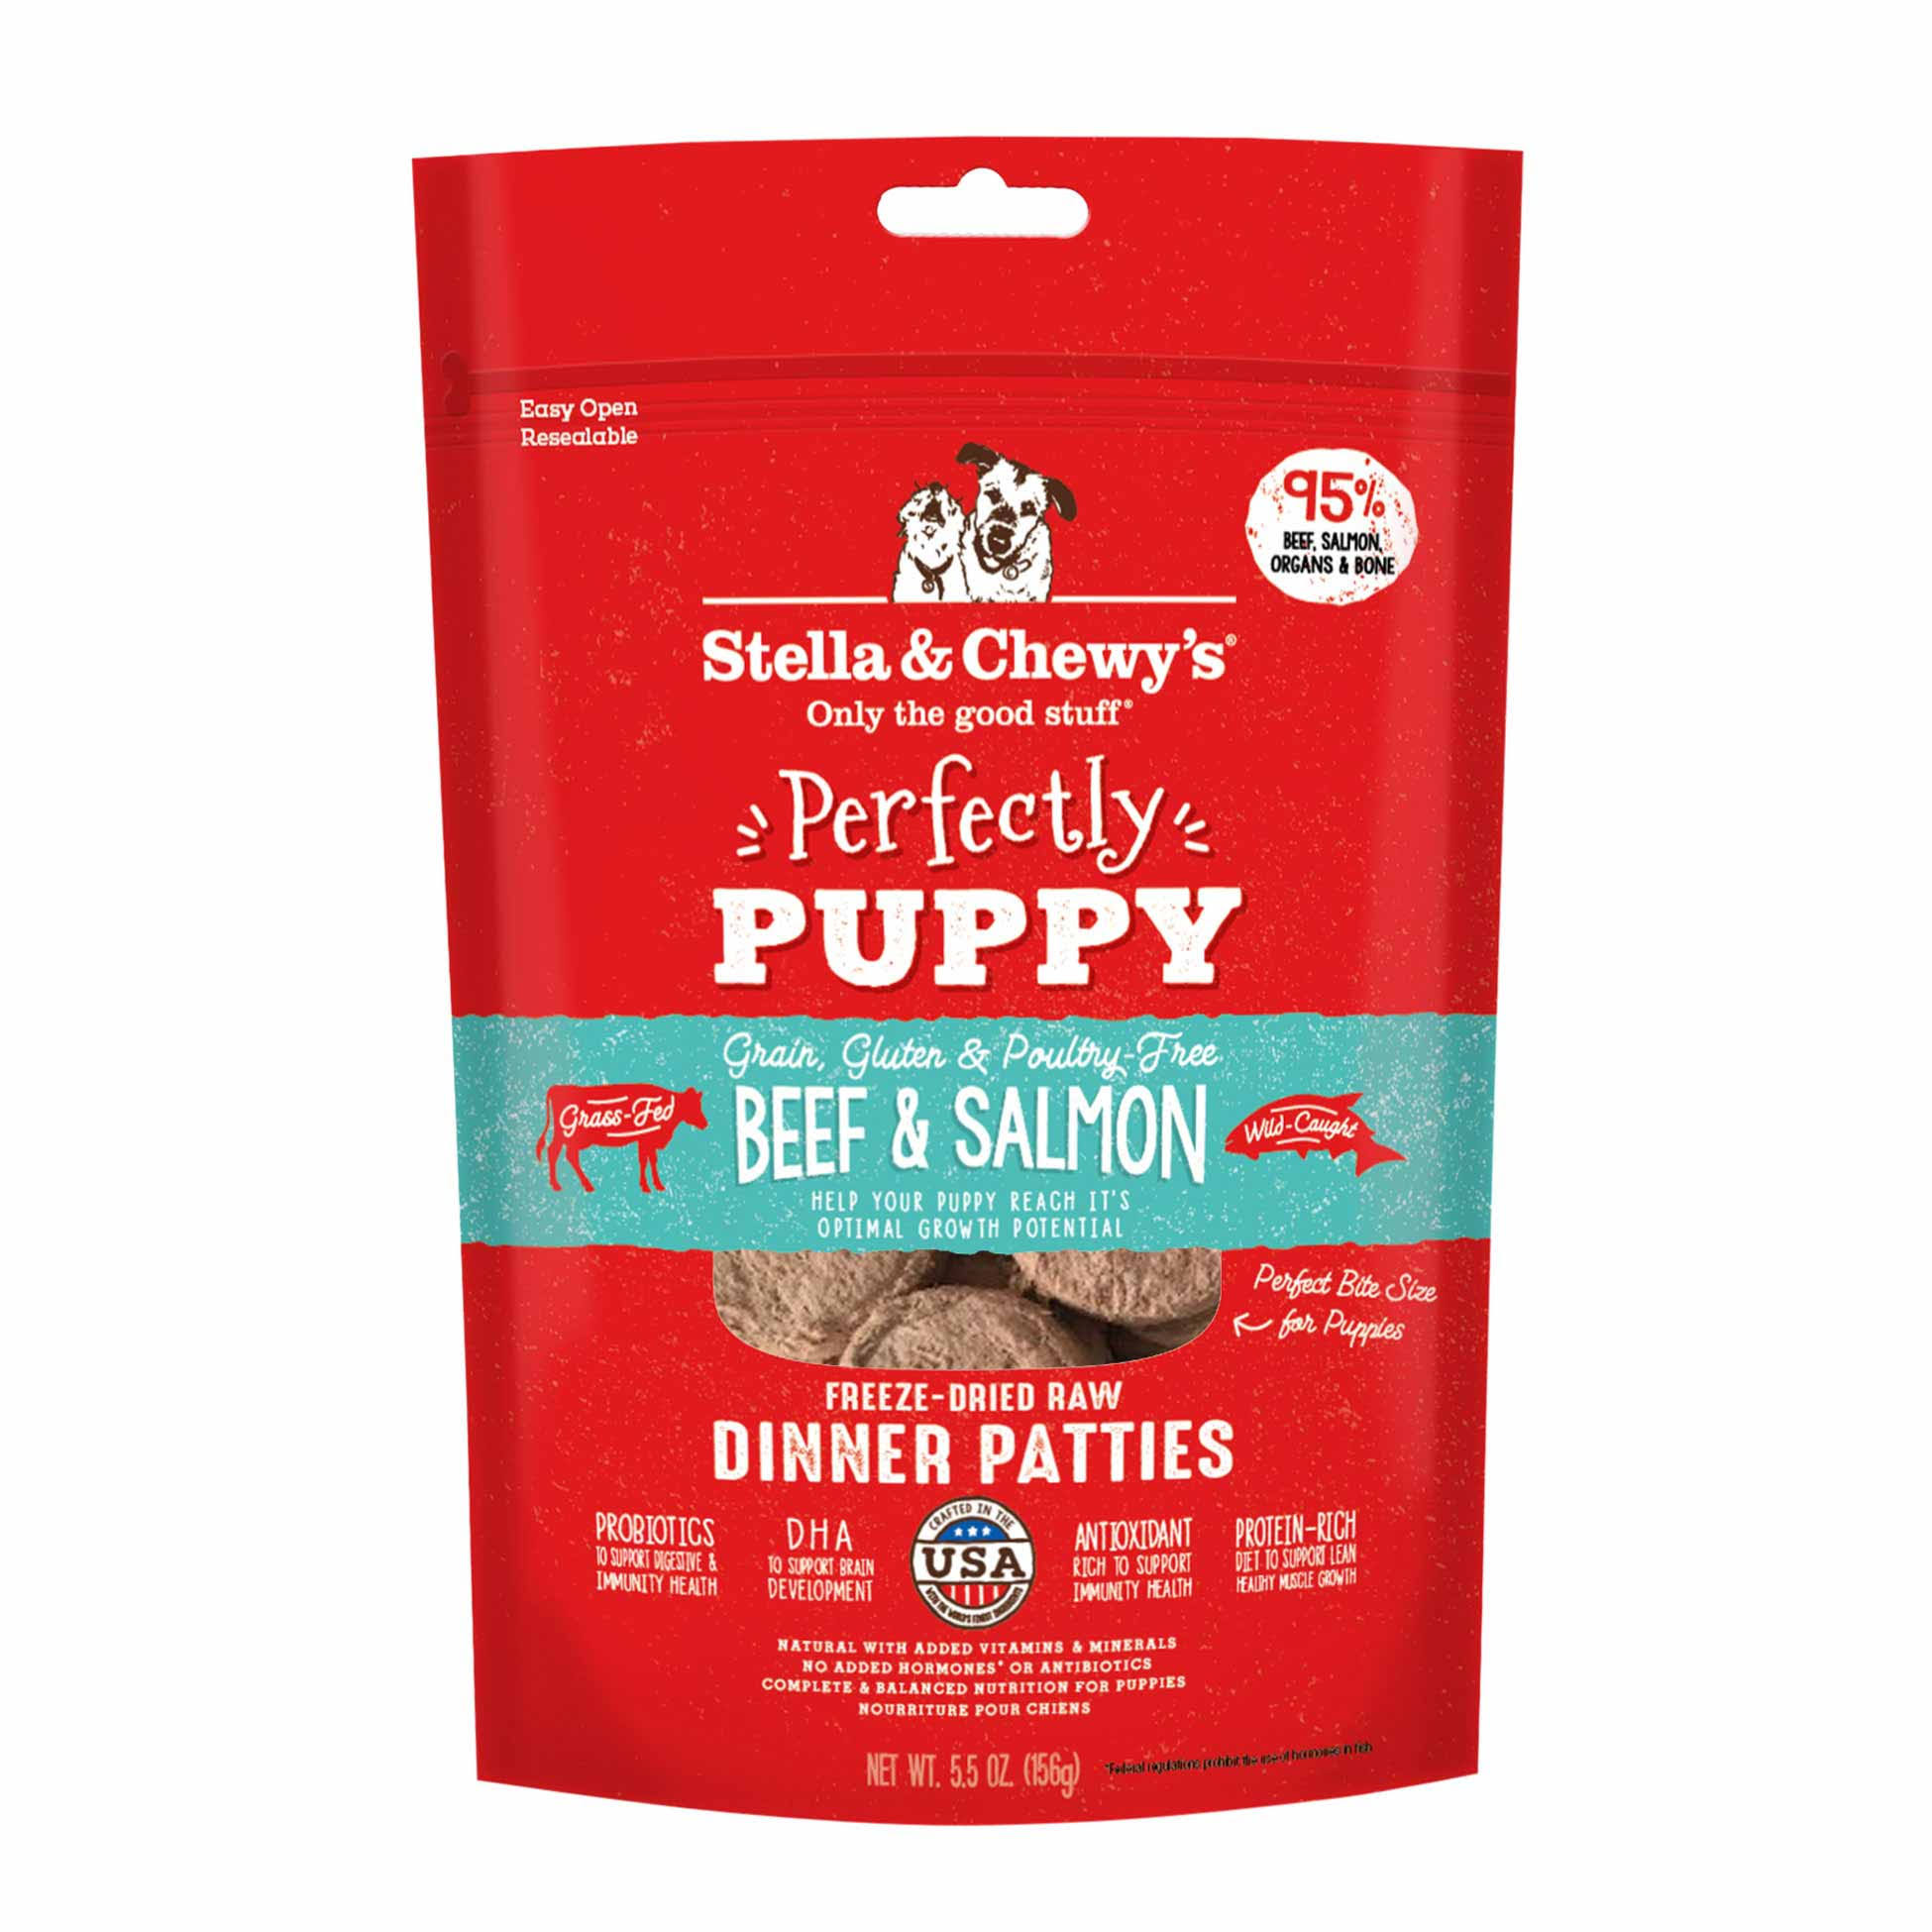 Stella & Chewy's Perfectly Puppy Freeze-Dried Raw Beef And Salmon Dinner Patties Dog Food, 5.5 Oz. Bag